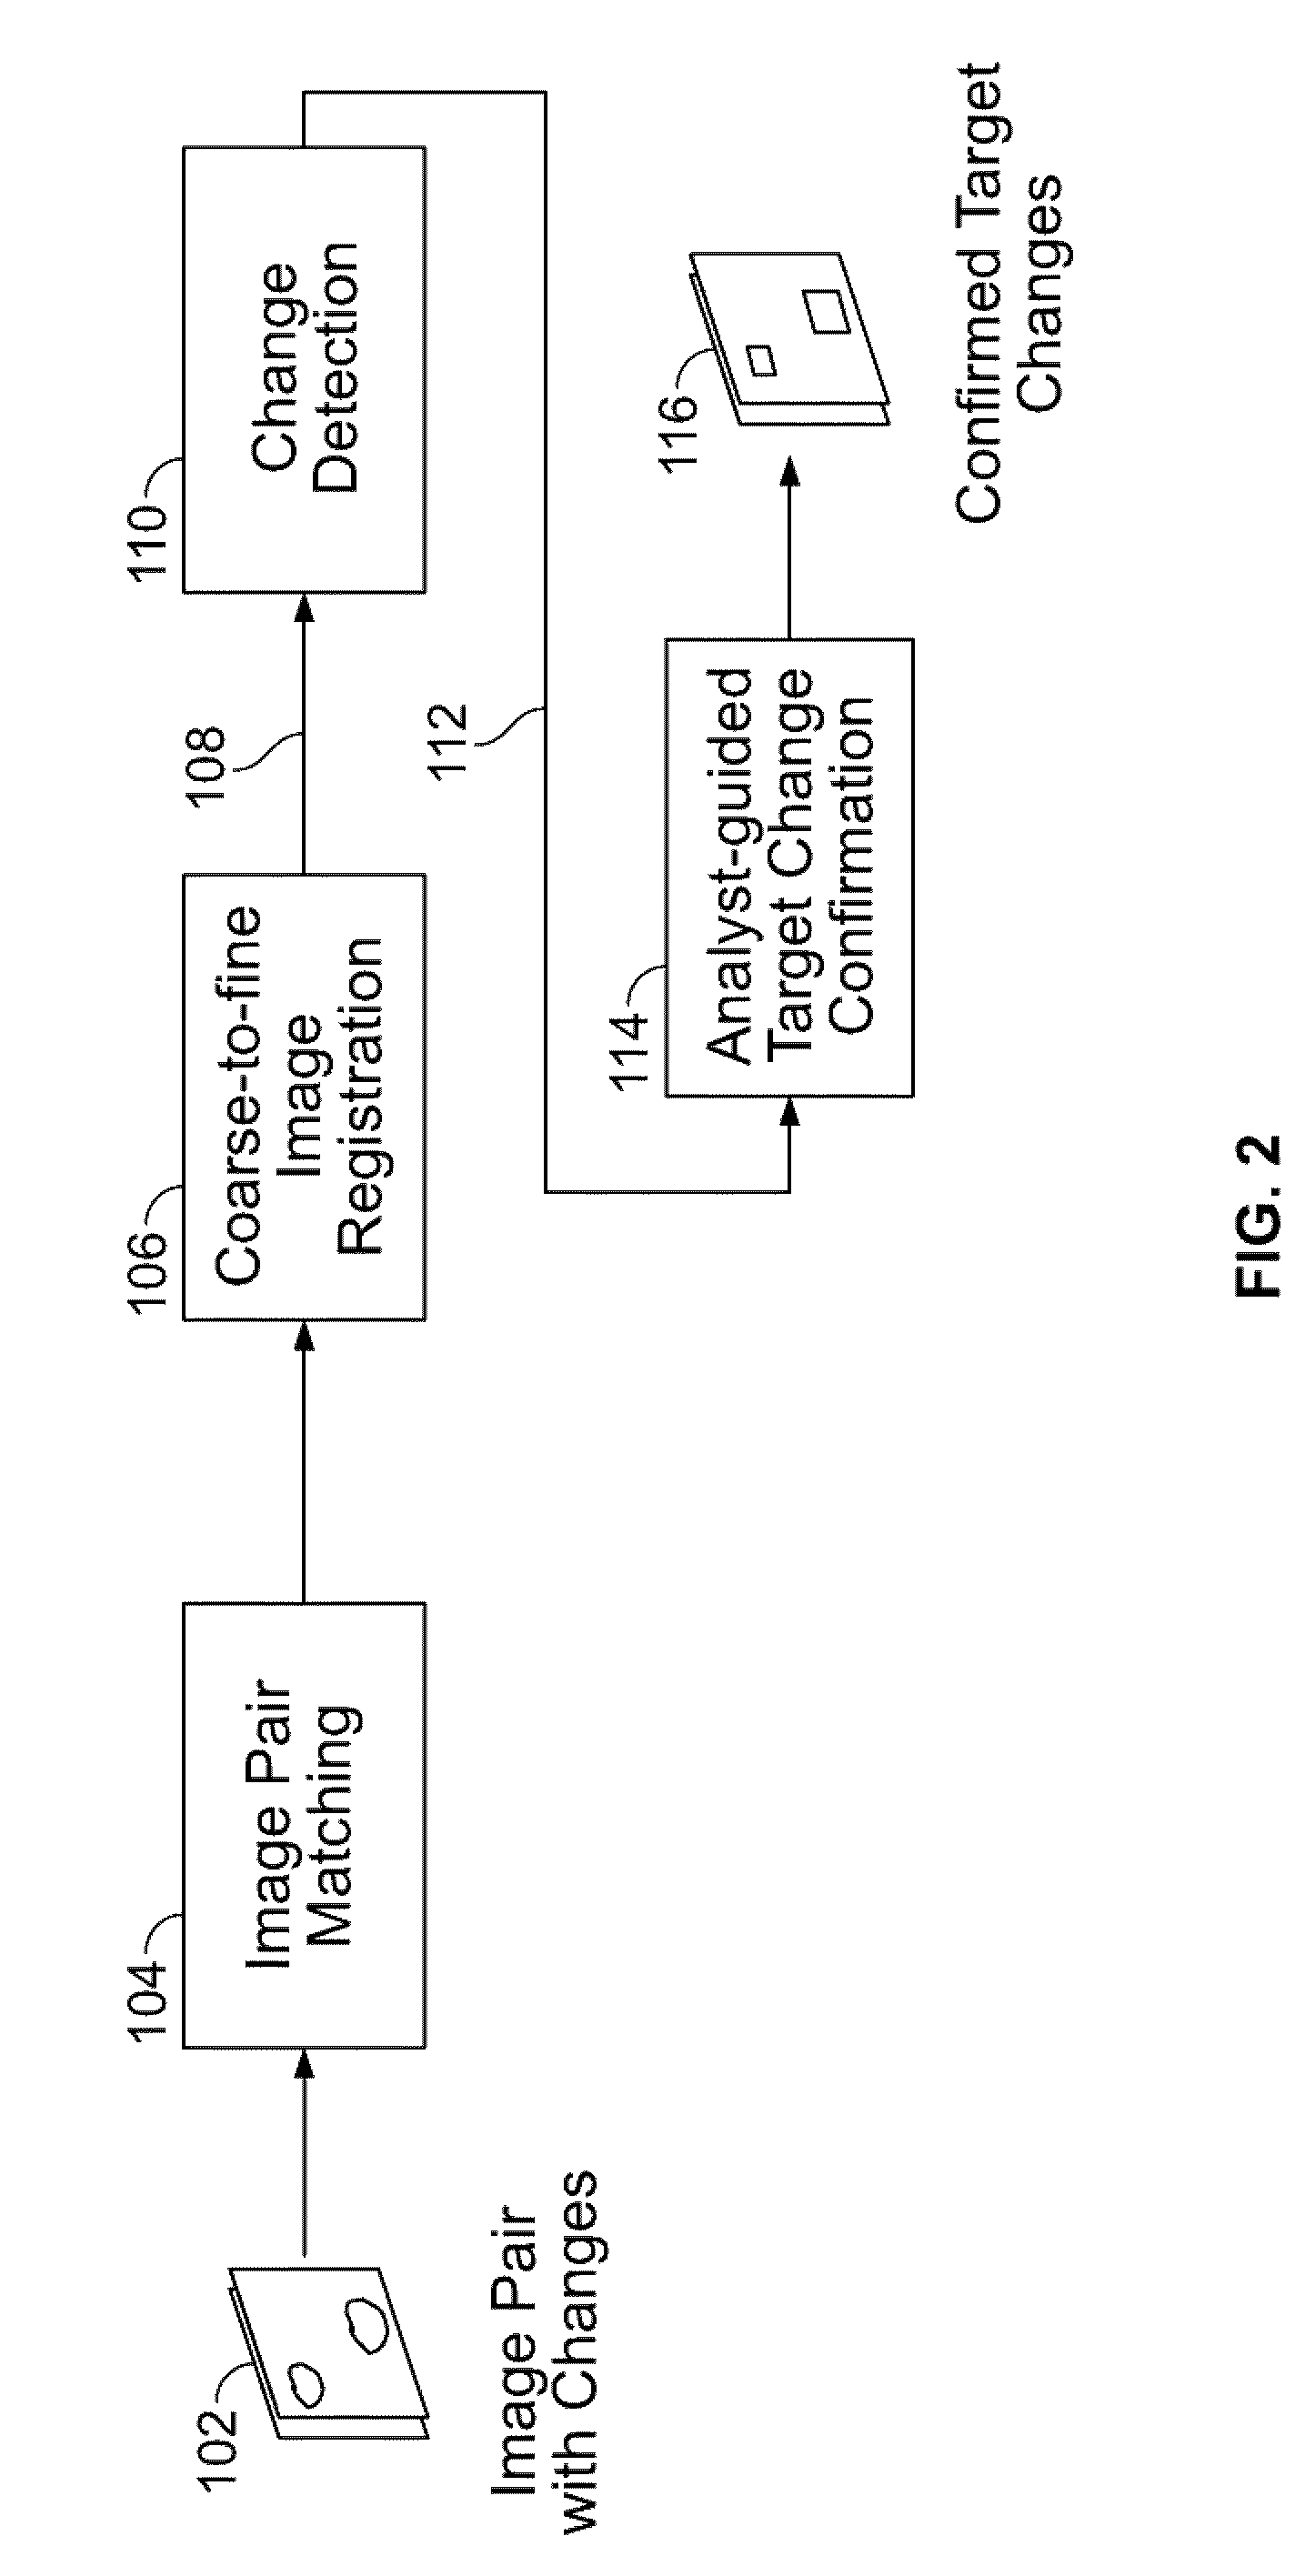 Method and apparatus for detecting targets through temporal scene changes